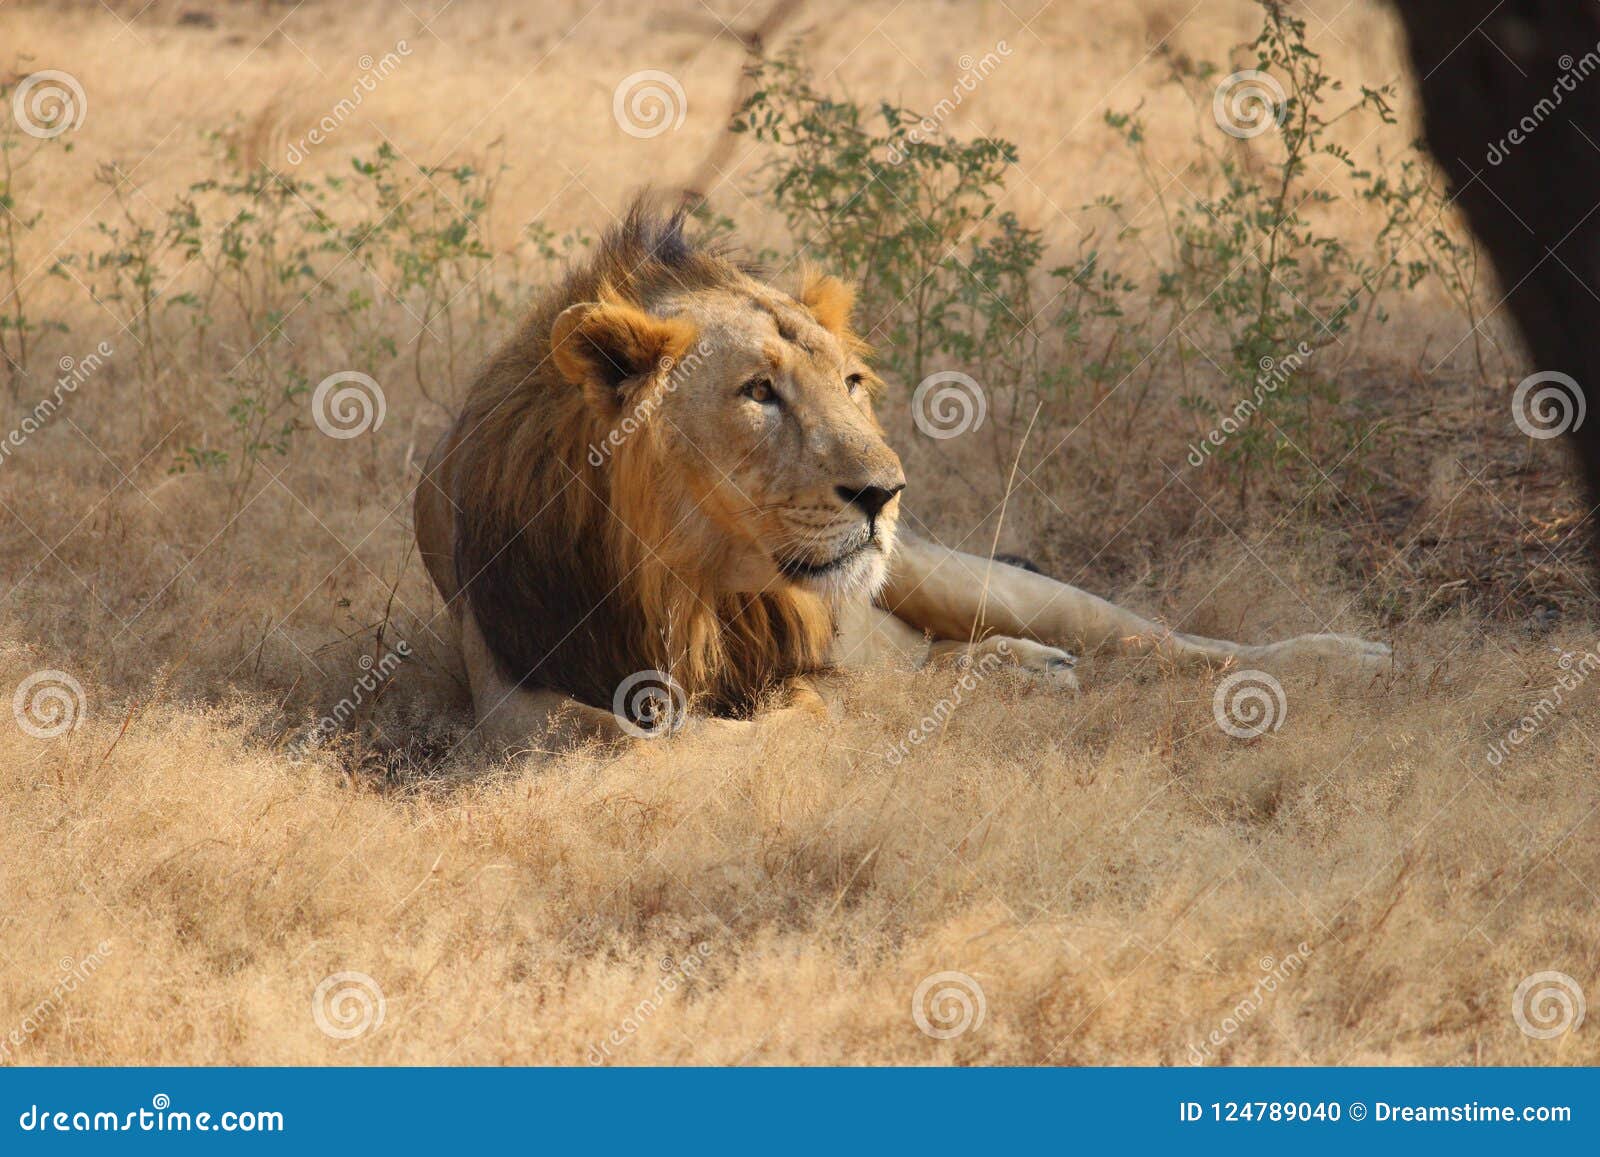 King of Animal stock photo. Image of lion, reserve, forest - 124789040